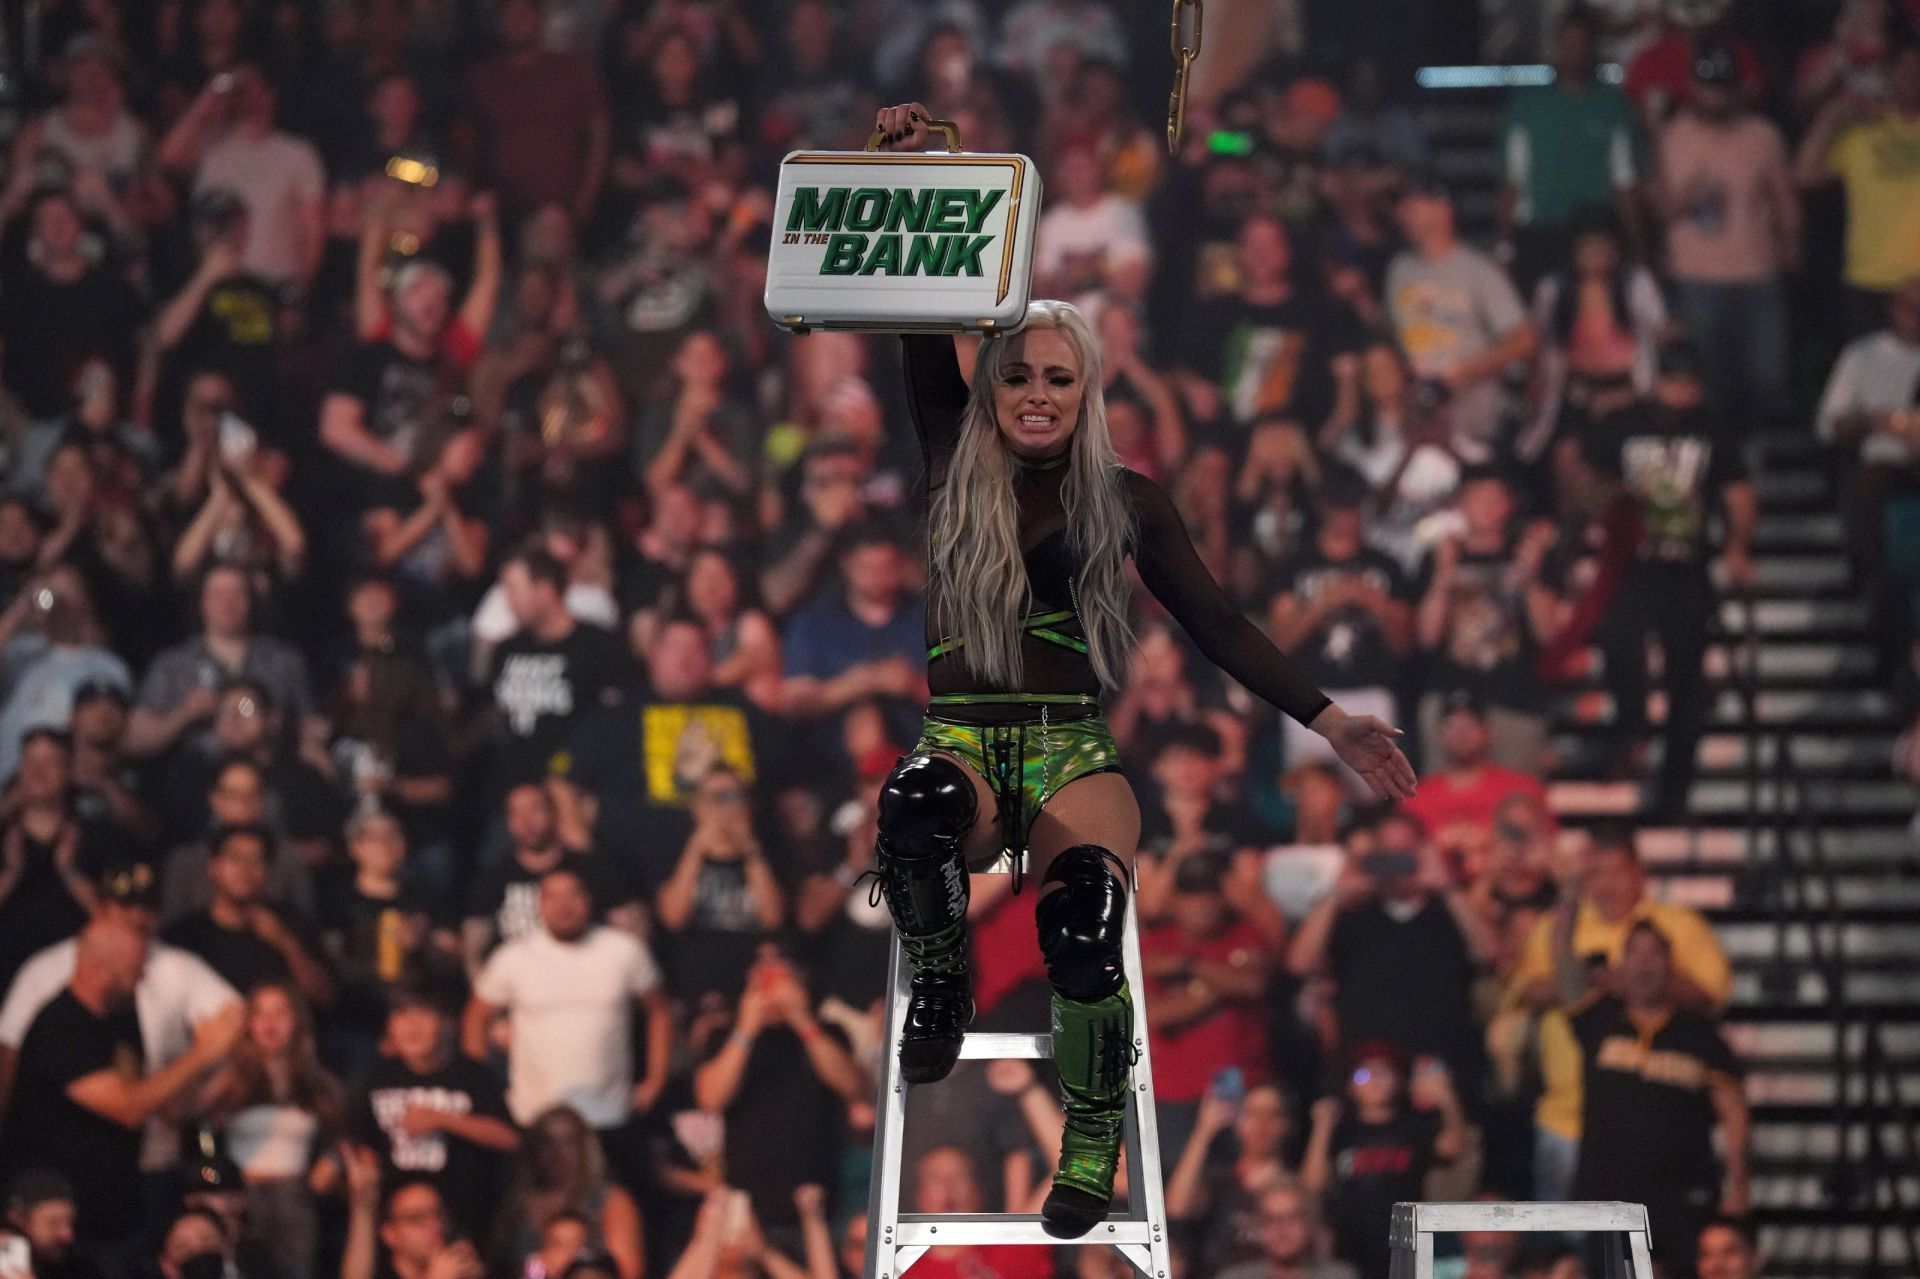 Liv Morgan climbed the ladder to get the MITB brieface